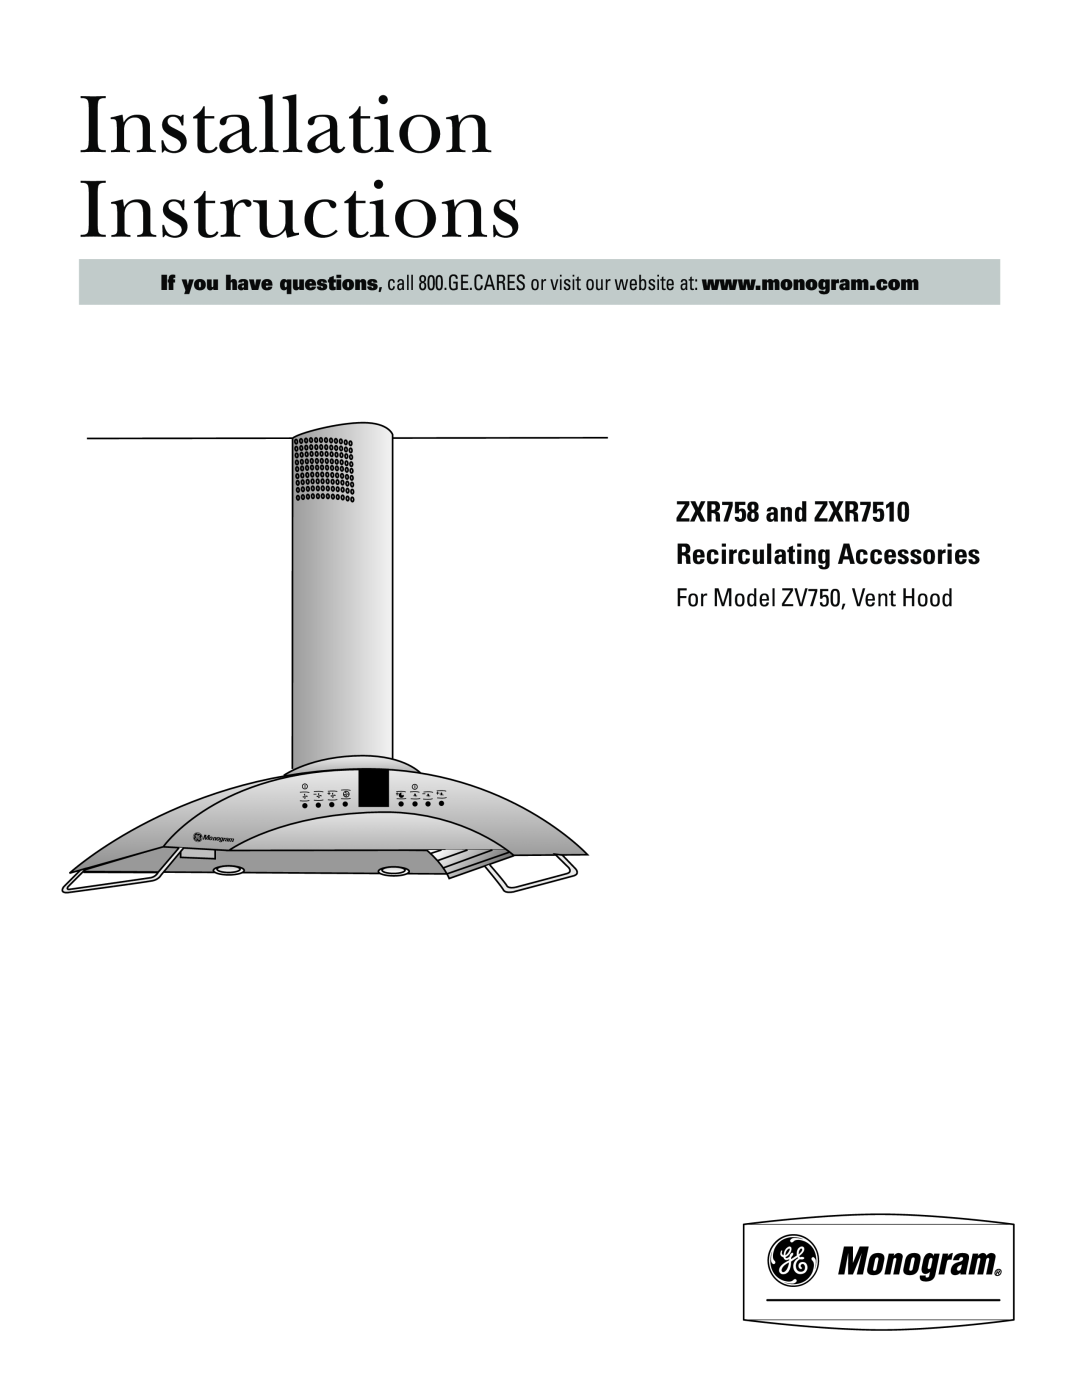 GE Monogram installation instructions Installation Instructions, ZXR758 and ZXR7510 Recirculating Accessories 